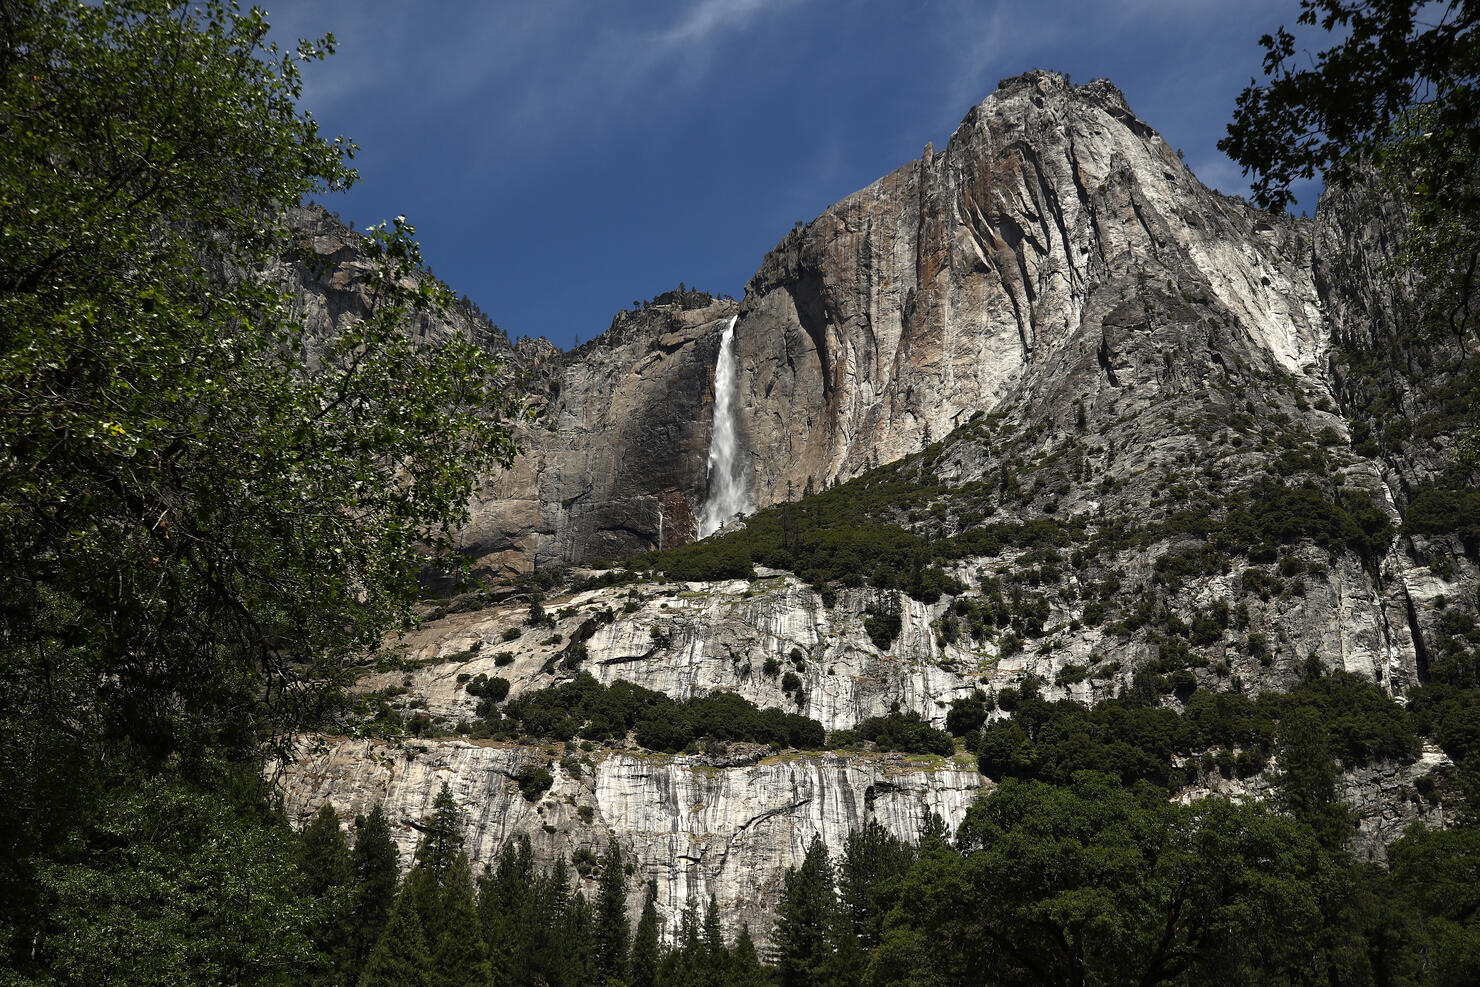 Yosemite National Park Reopens After Months Of Closure Due To Coronavirus Pandemic